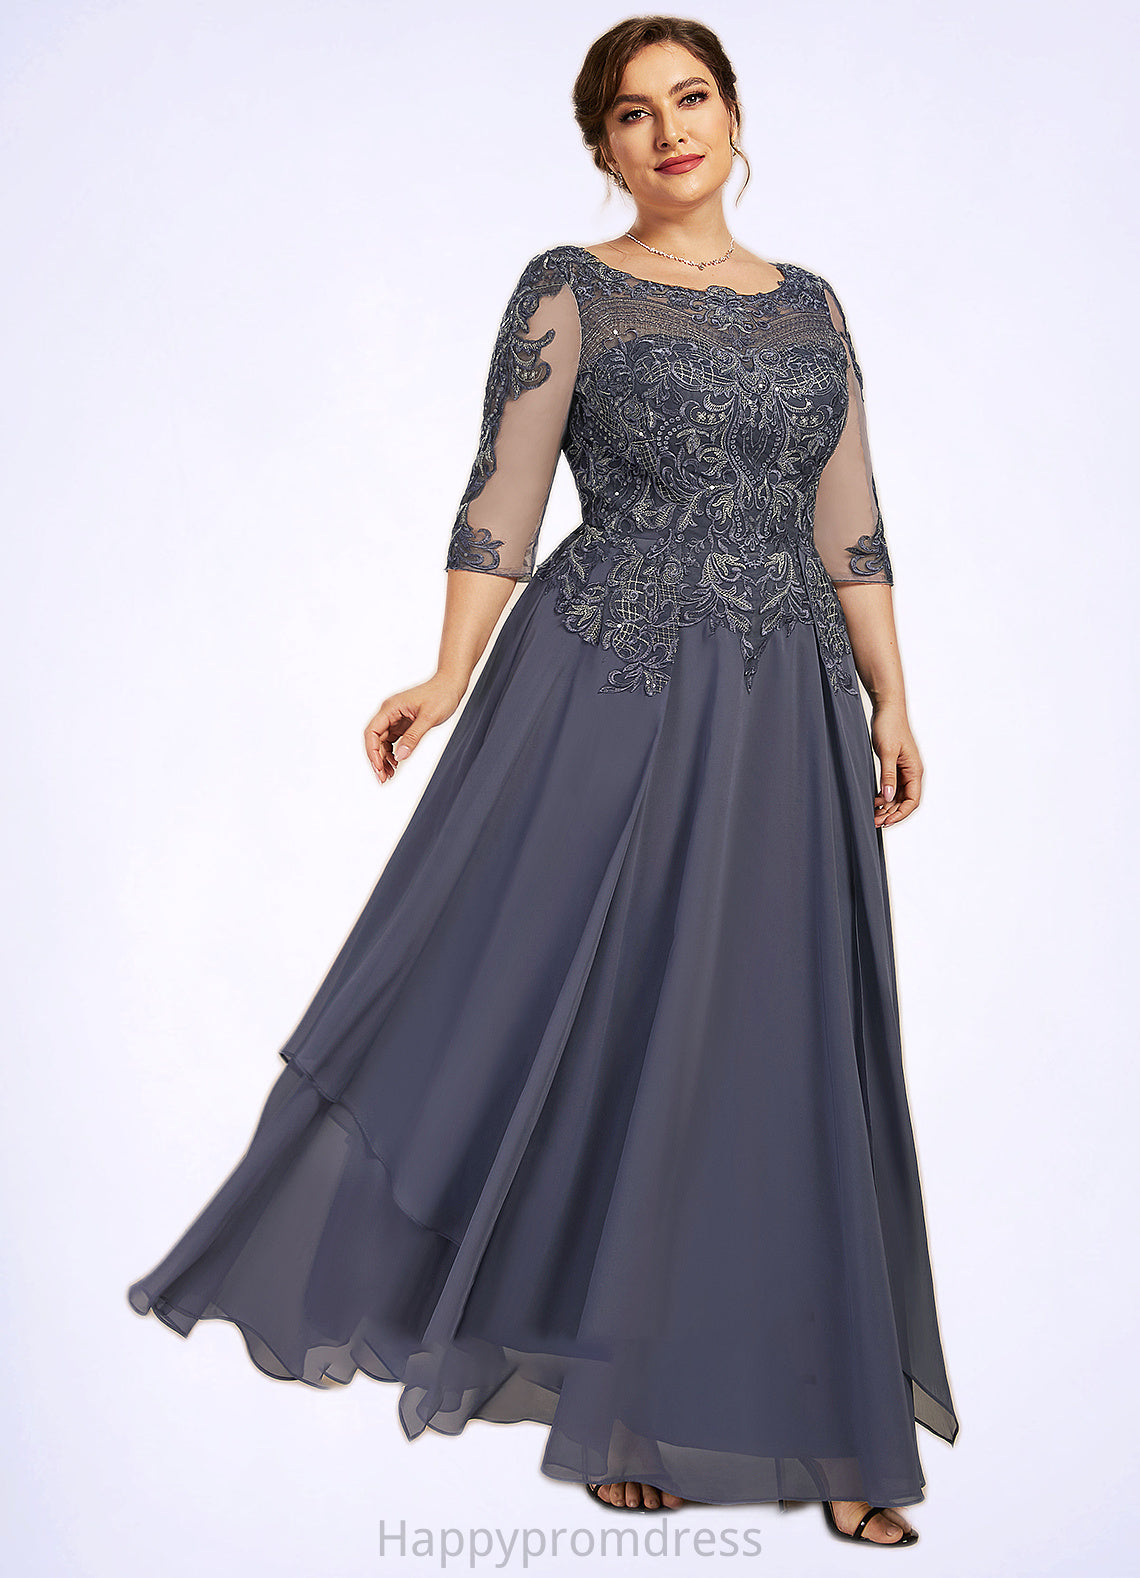 Cora A-Line Scoop Neck Ankle-Length Chiffon Lace Mother of the Bride Dress With Cascading Ruffles XXS126P0014698